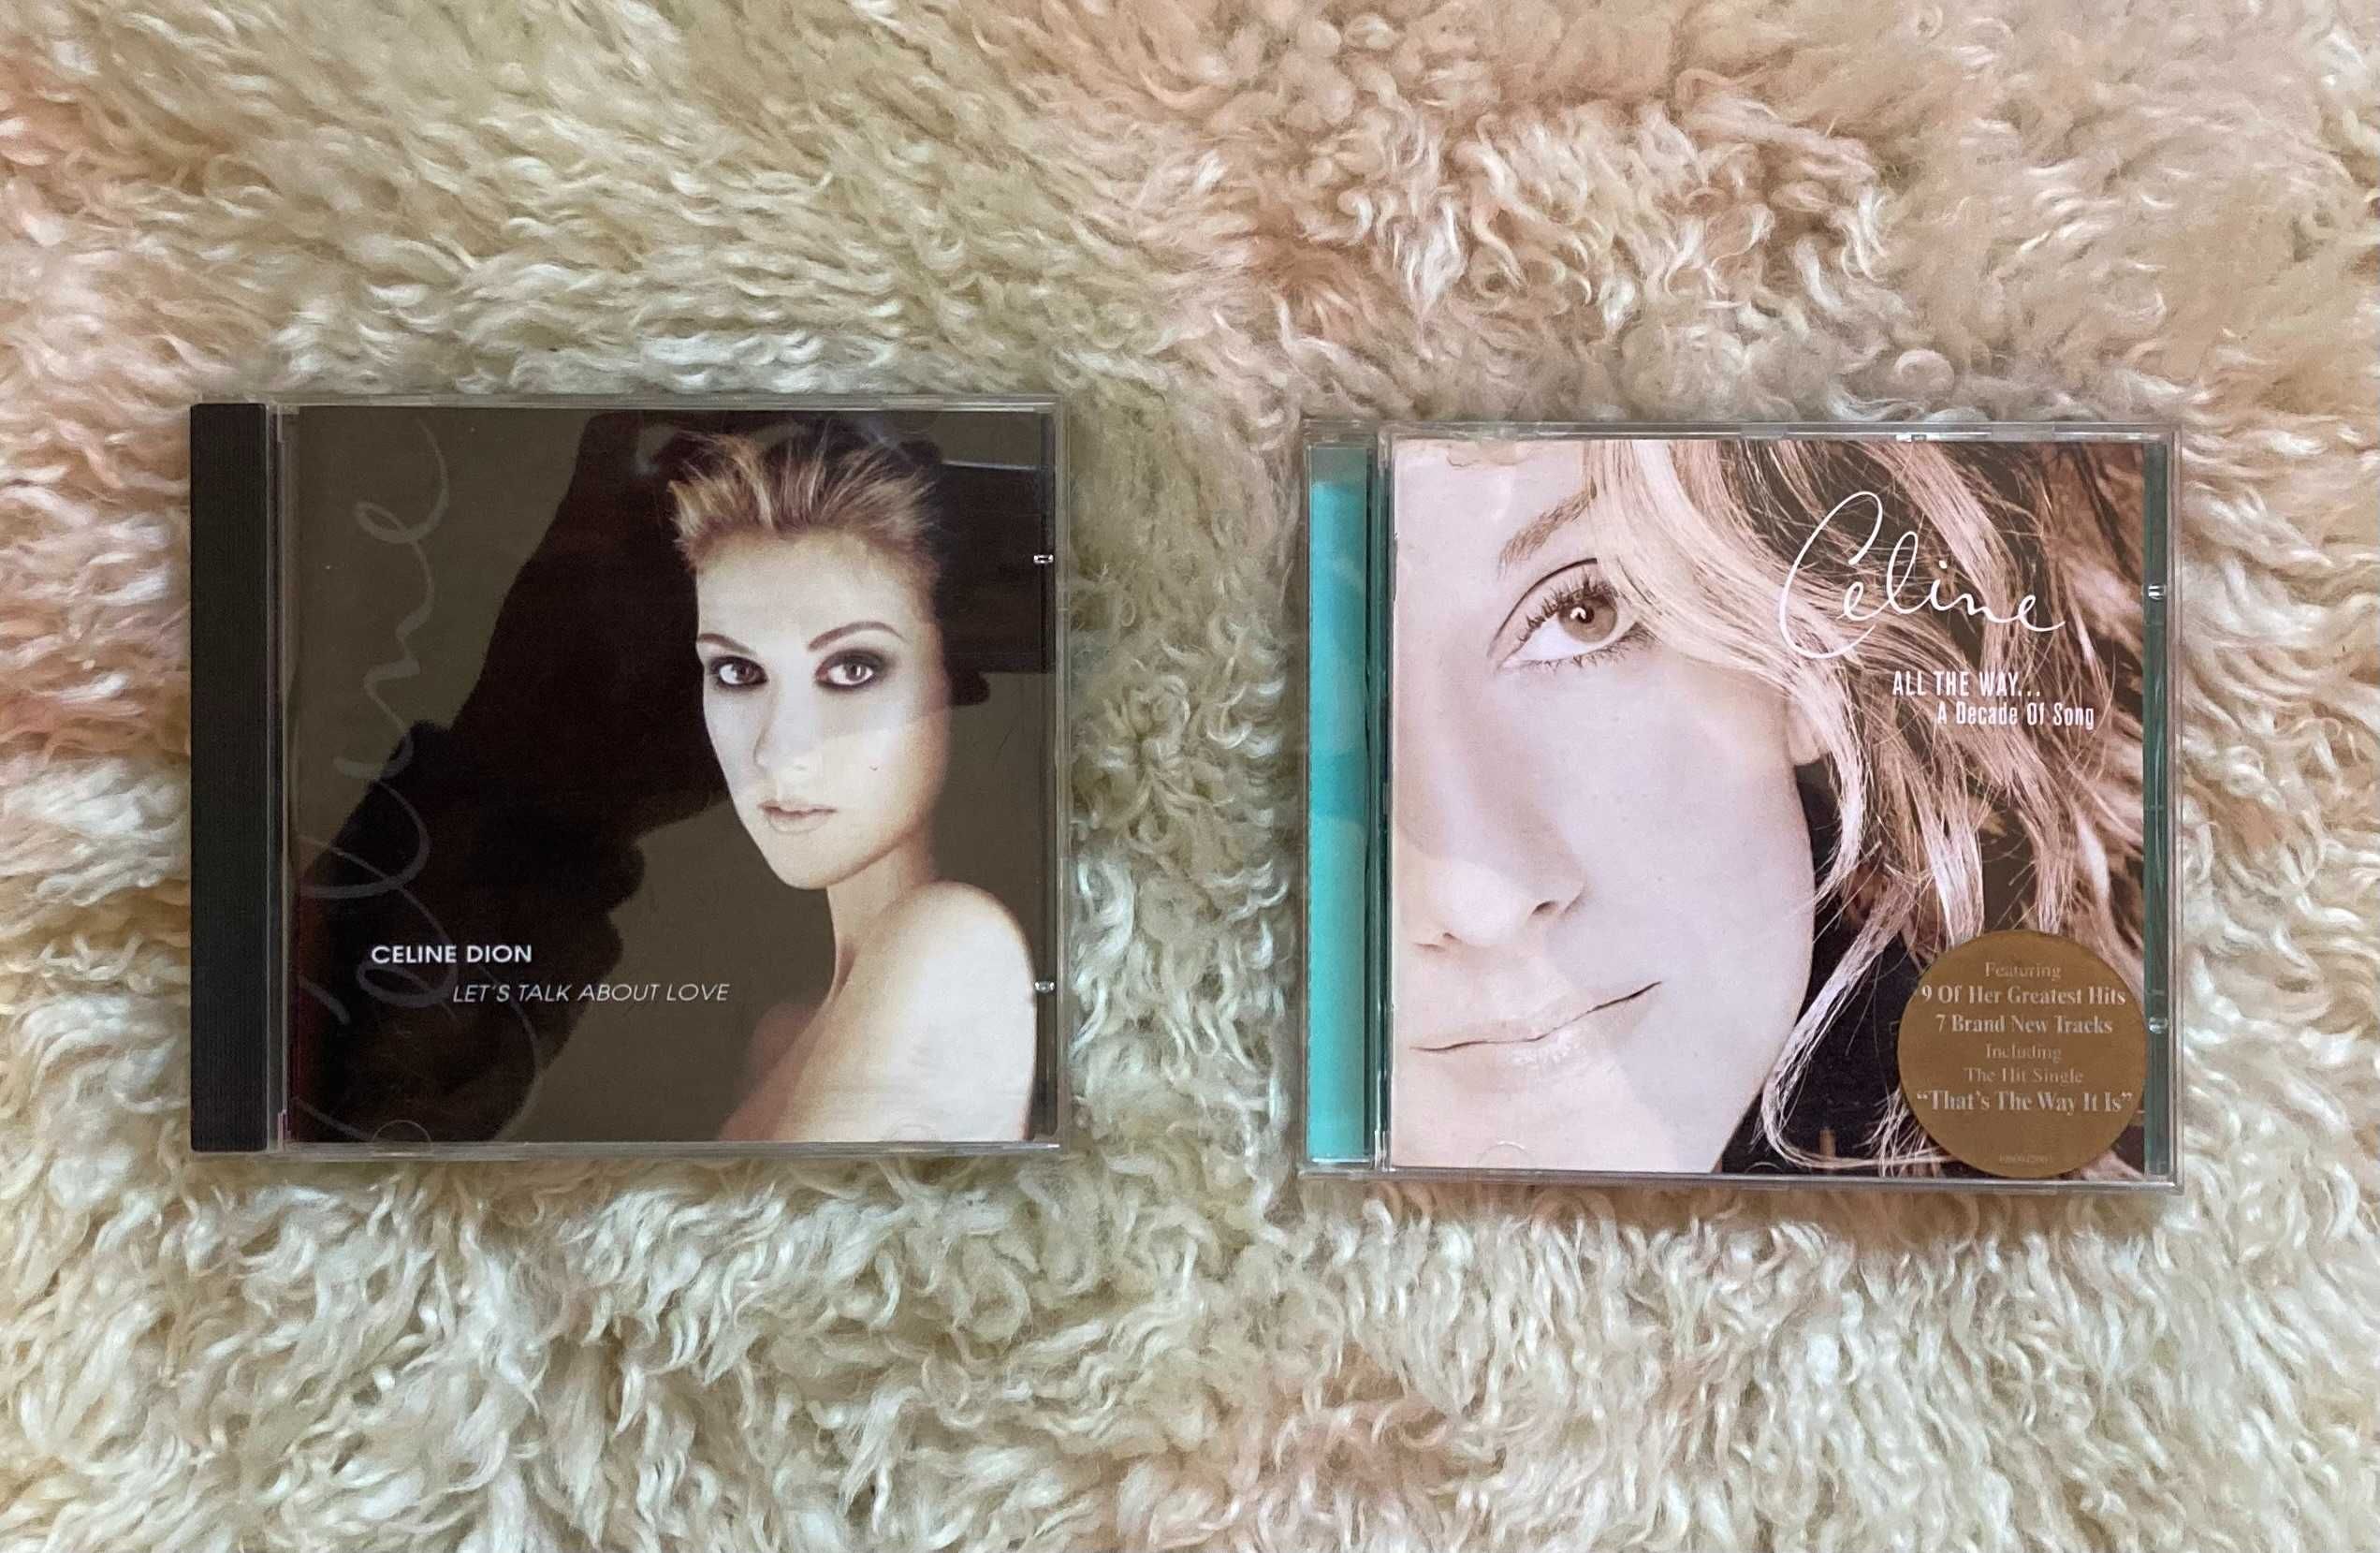 Celine Dion - Let's talk about love / All the way... a decade of song